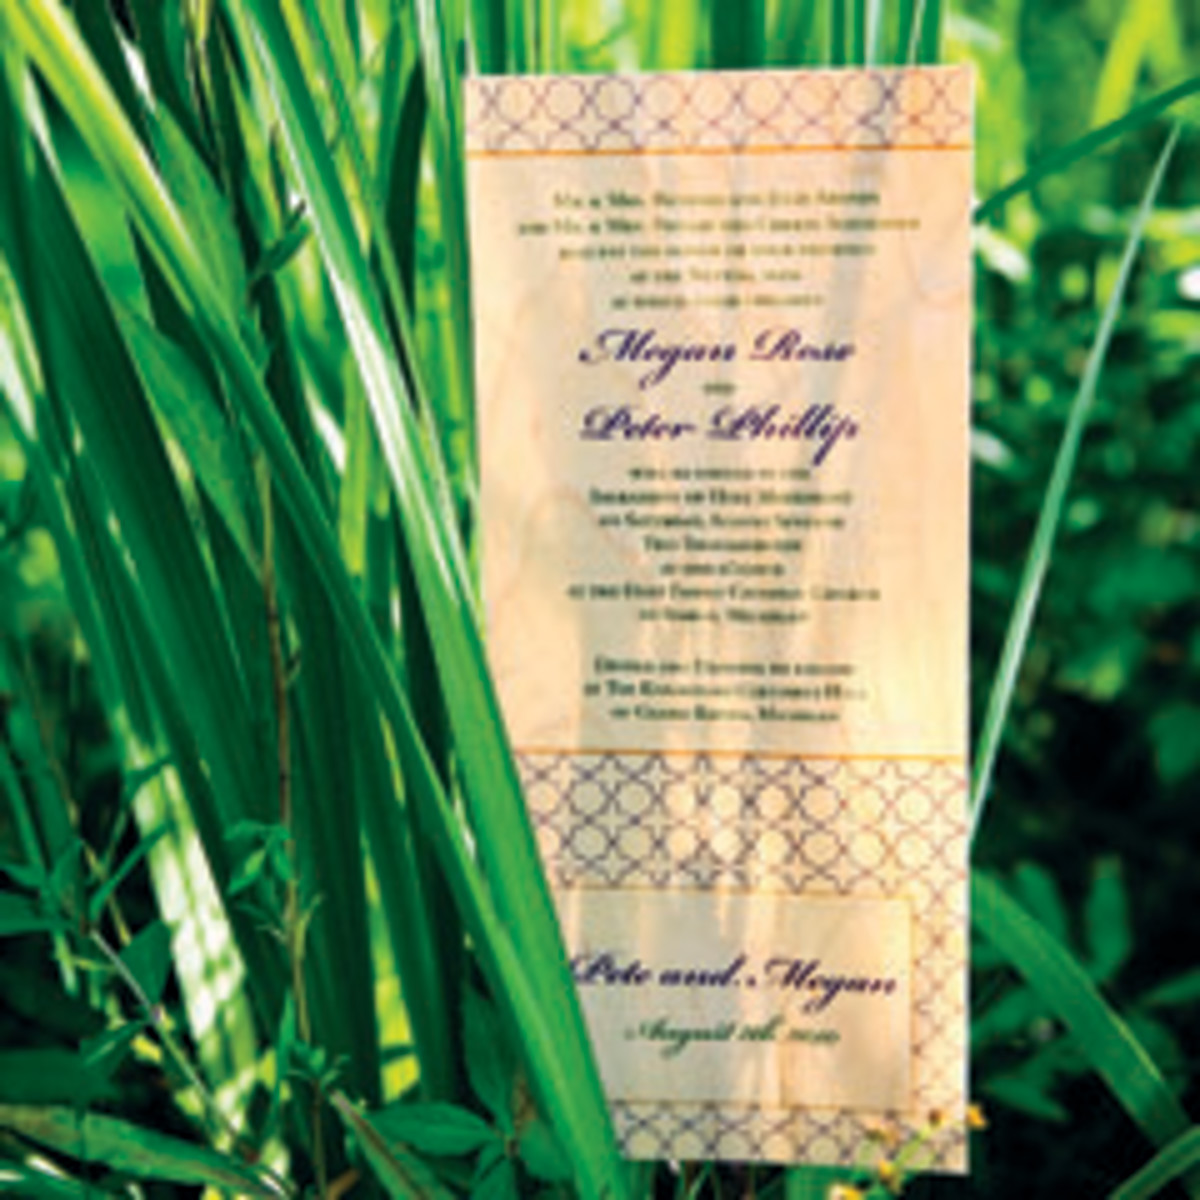 Cards of Wood offers an assortment of custome veneer cards and other not products to both individuals and business owners looking for a way to make a statement.